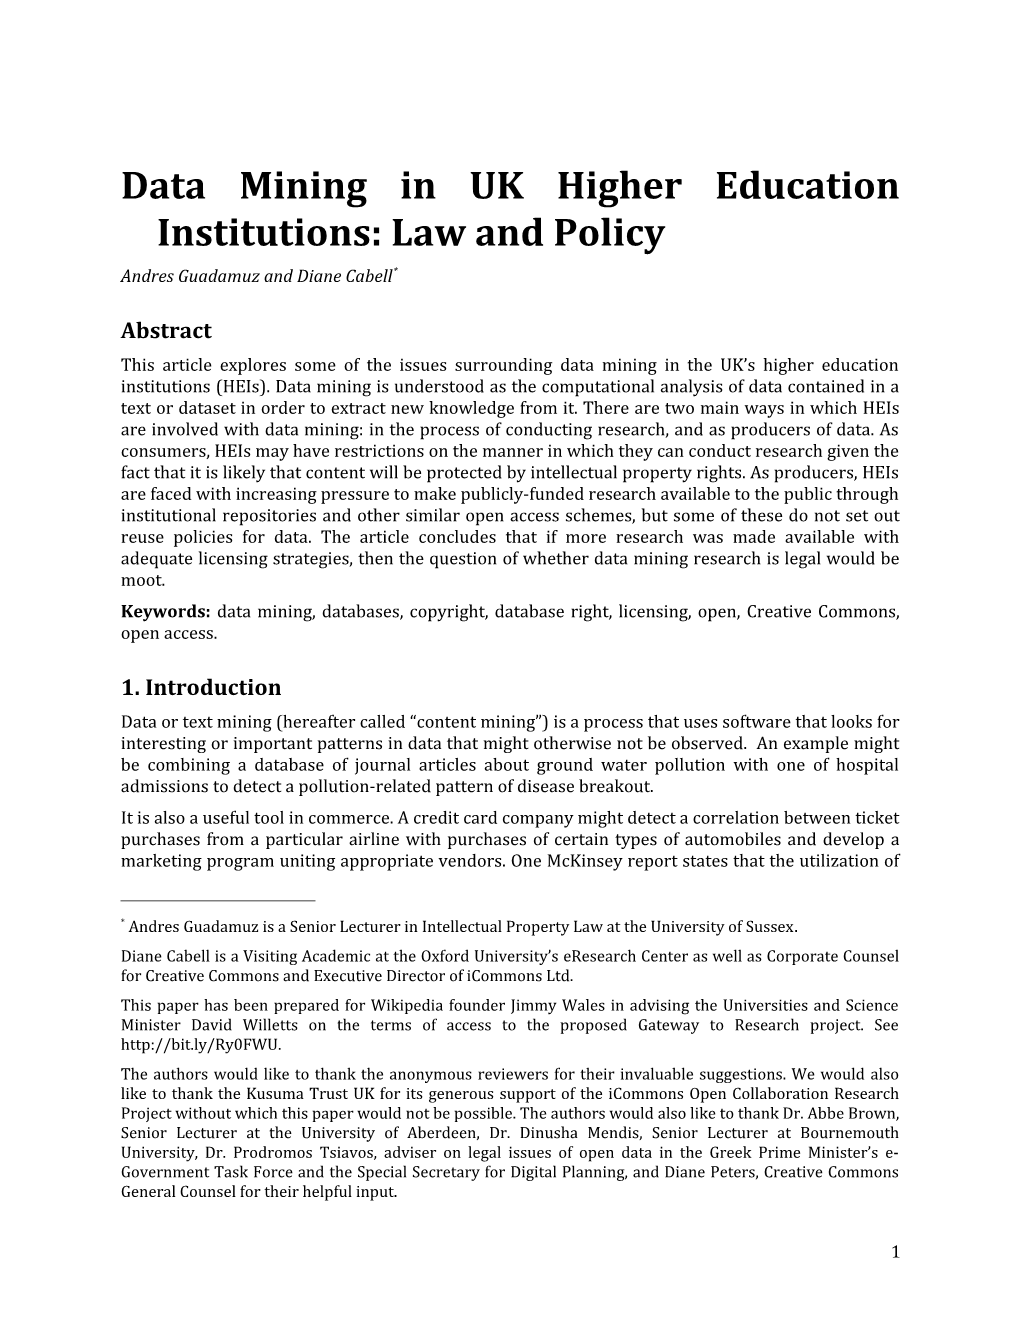 Data Mining in UK Higher Education Institutions: Law and Policy